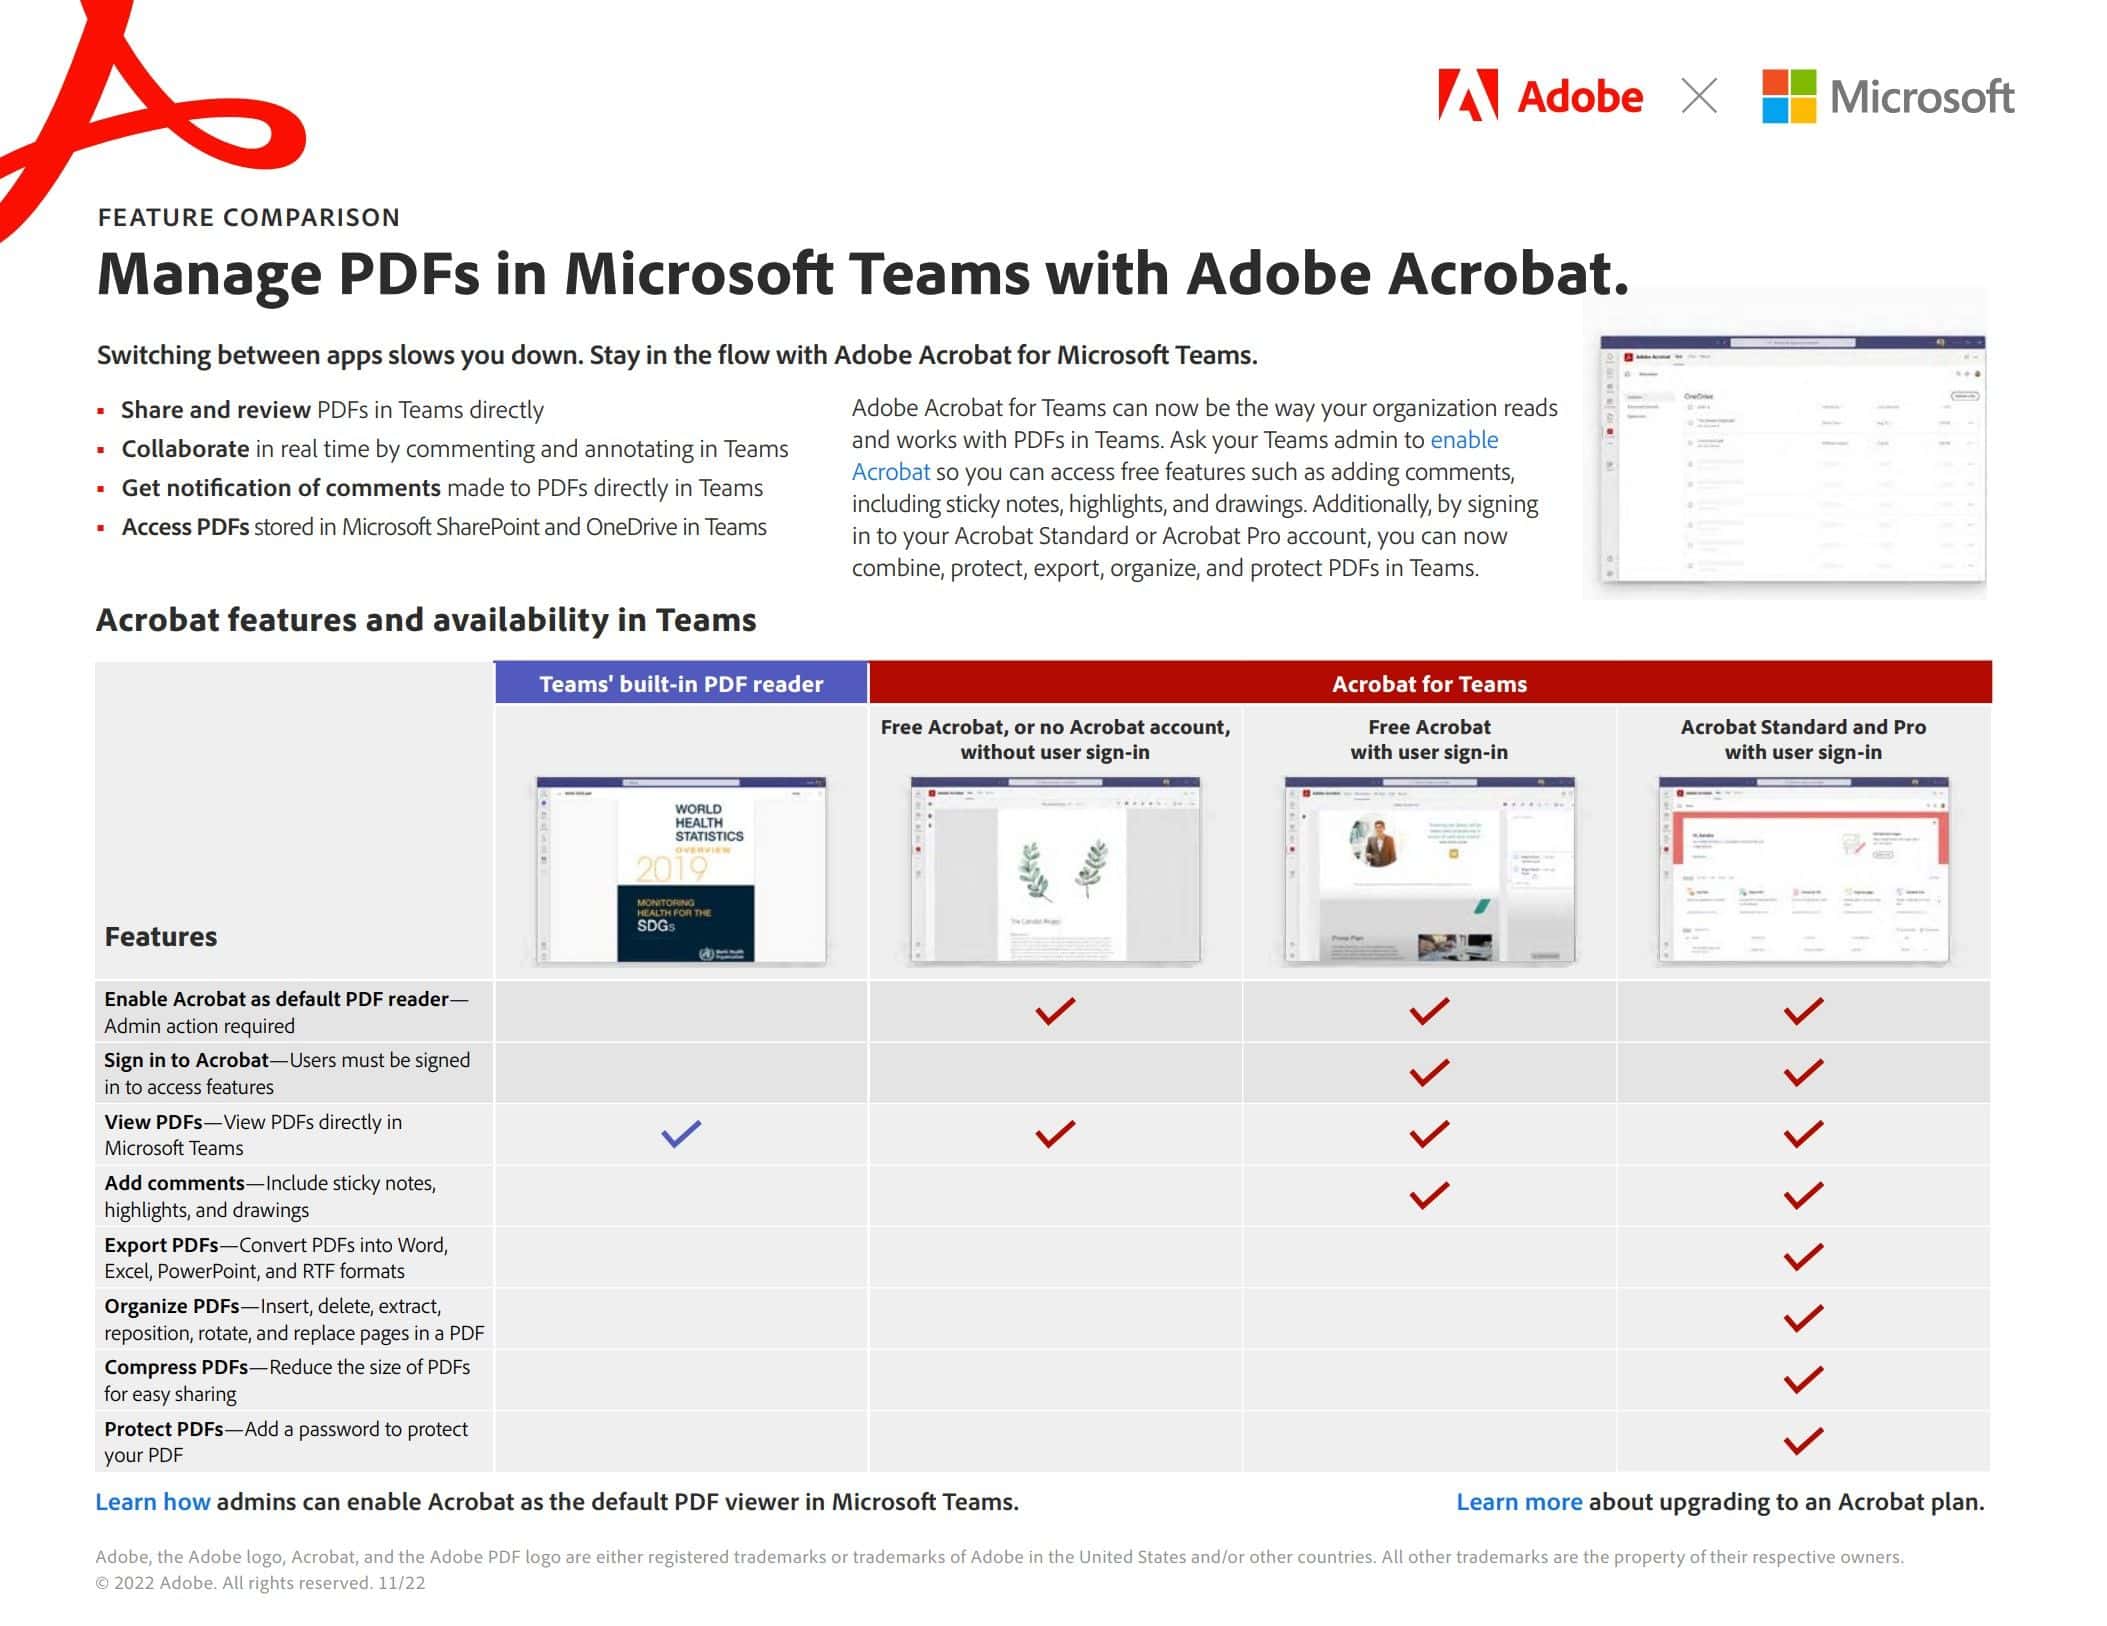 Adobe Acrobat is now integrated into Microsoft Teams